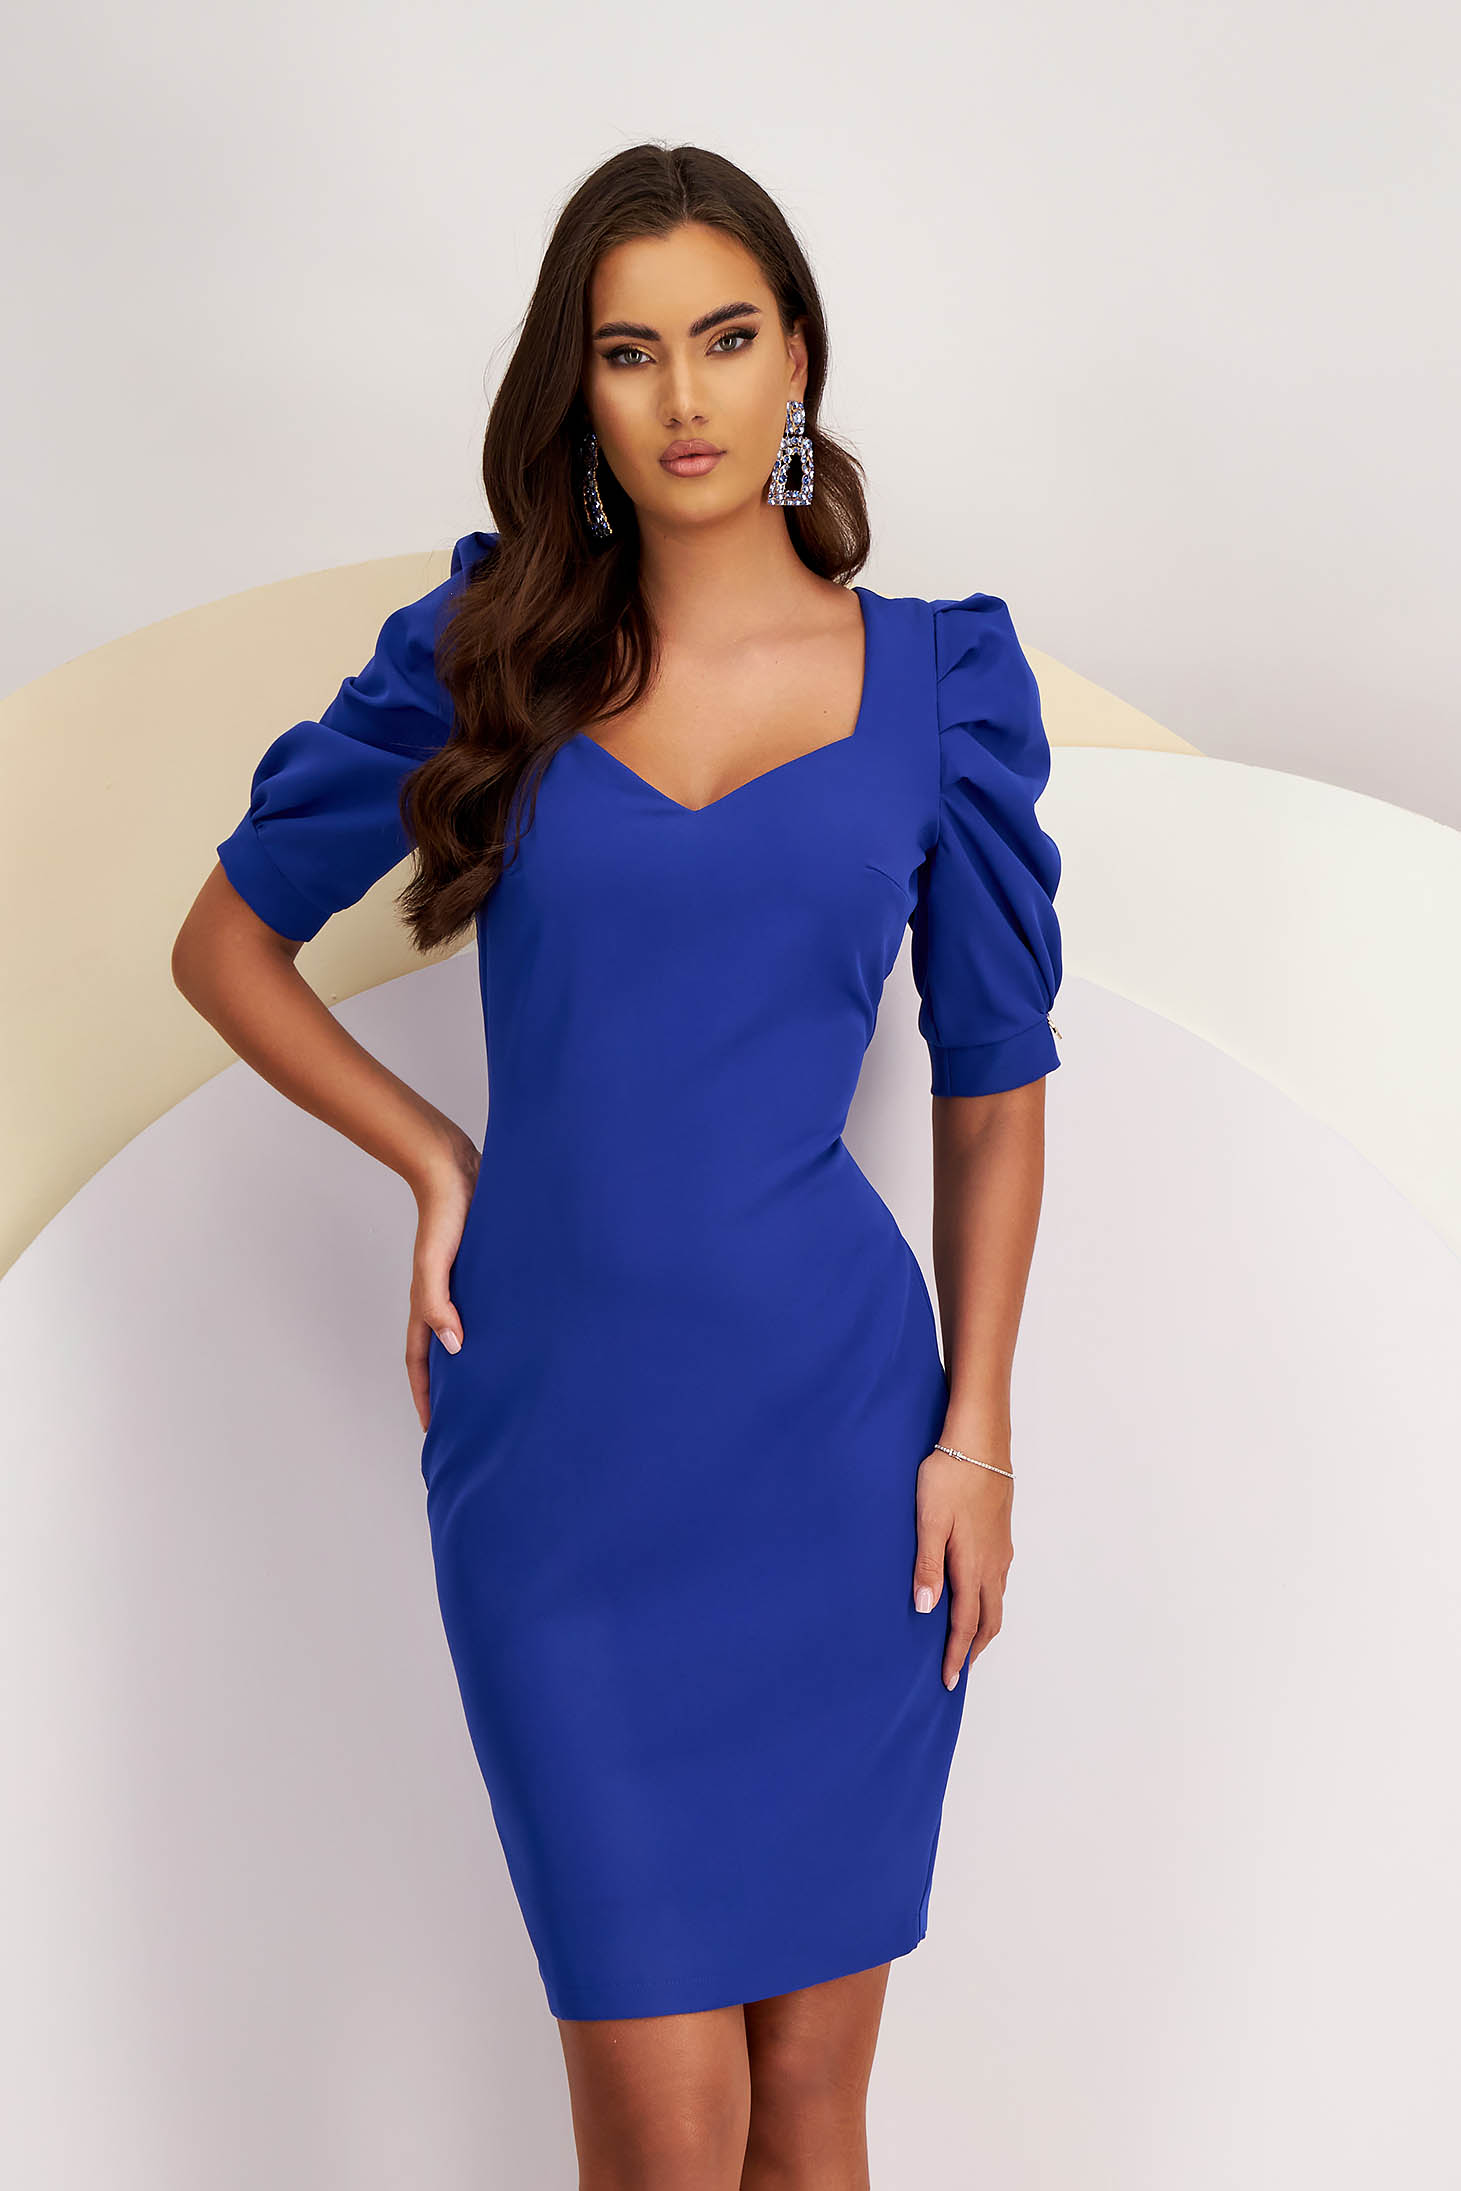 Blue Elastic Fabric Knee-Length Pencil Dress with Puffed Sleeves - StarShinerS